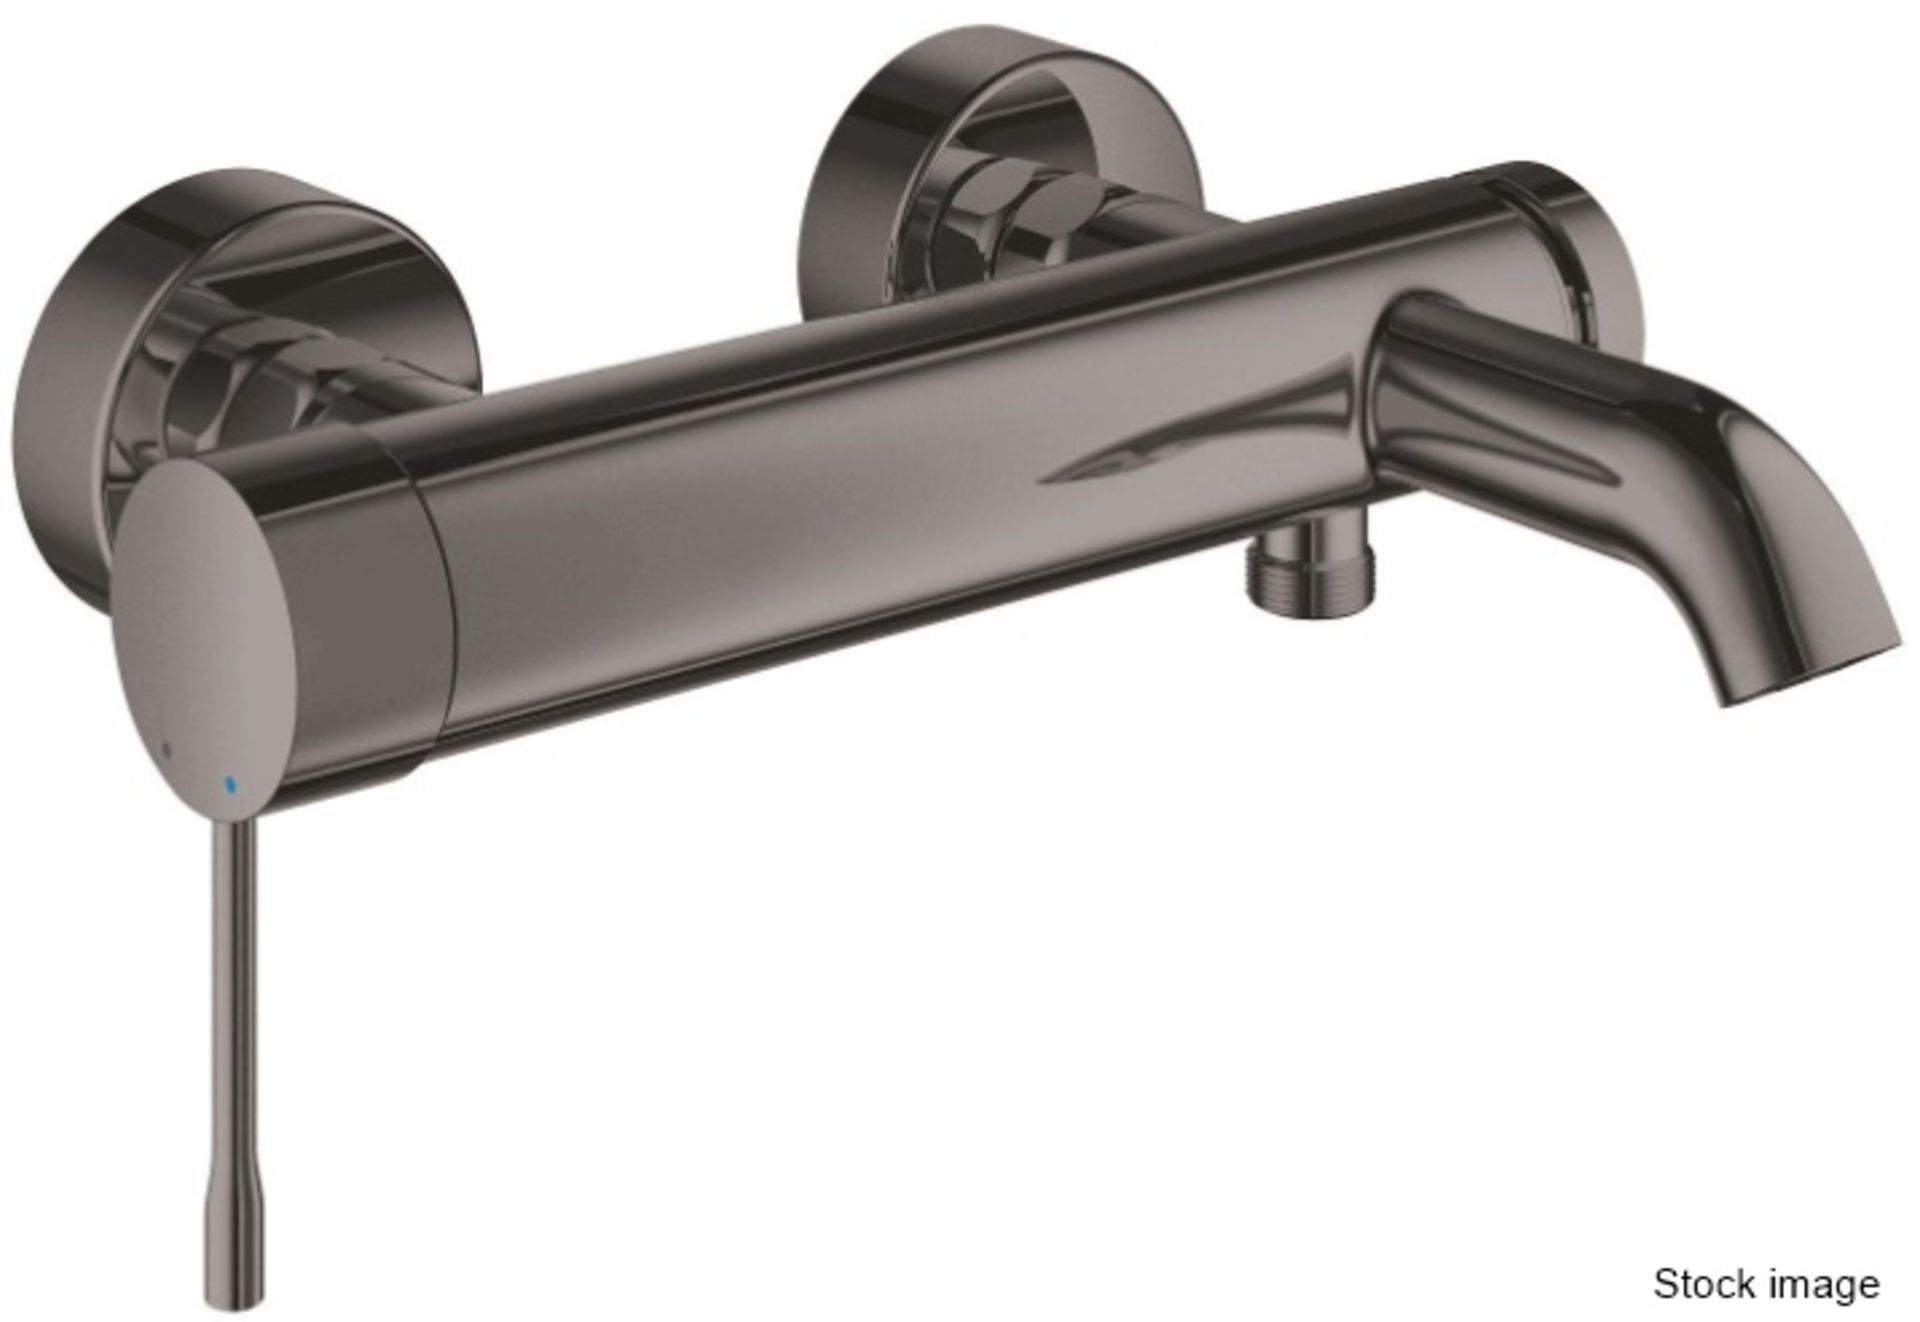 1 x GROHE 'Essence' Exposed Single Lever Bathtub Mixer With 2 Outlets, In A Hard Graphite Finish -